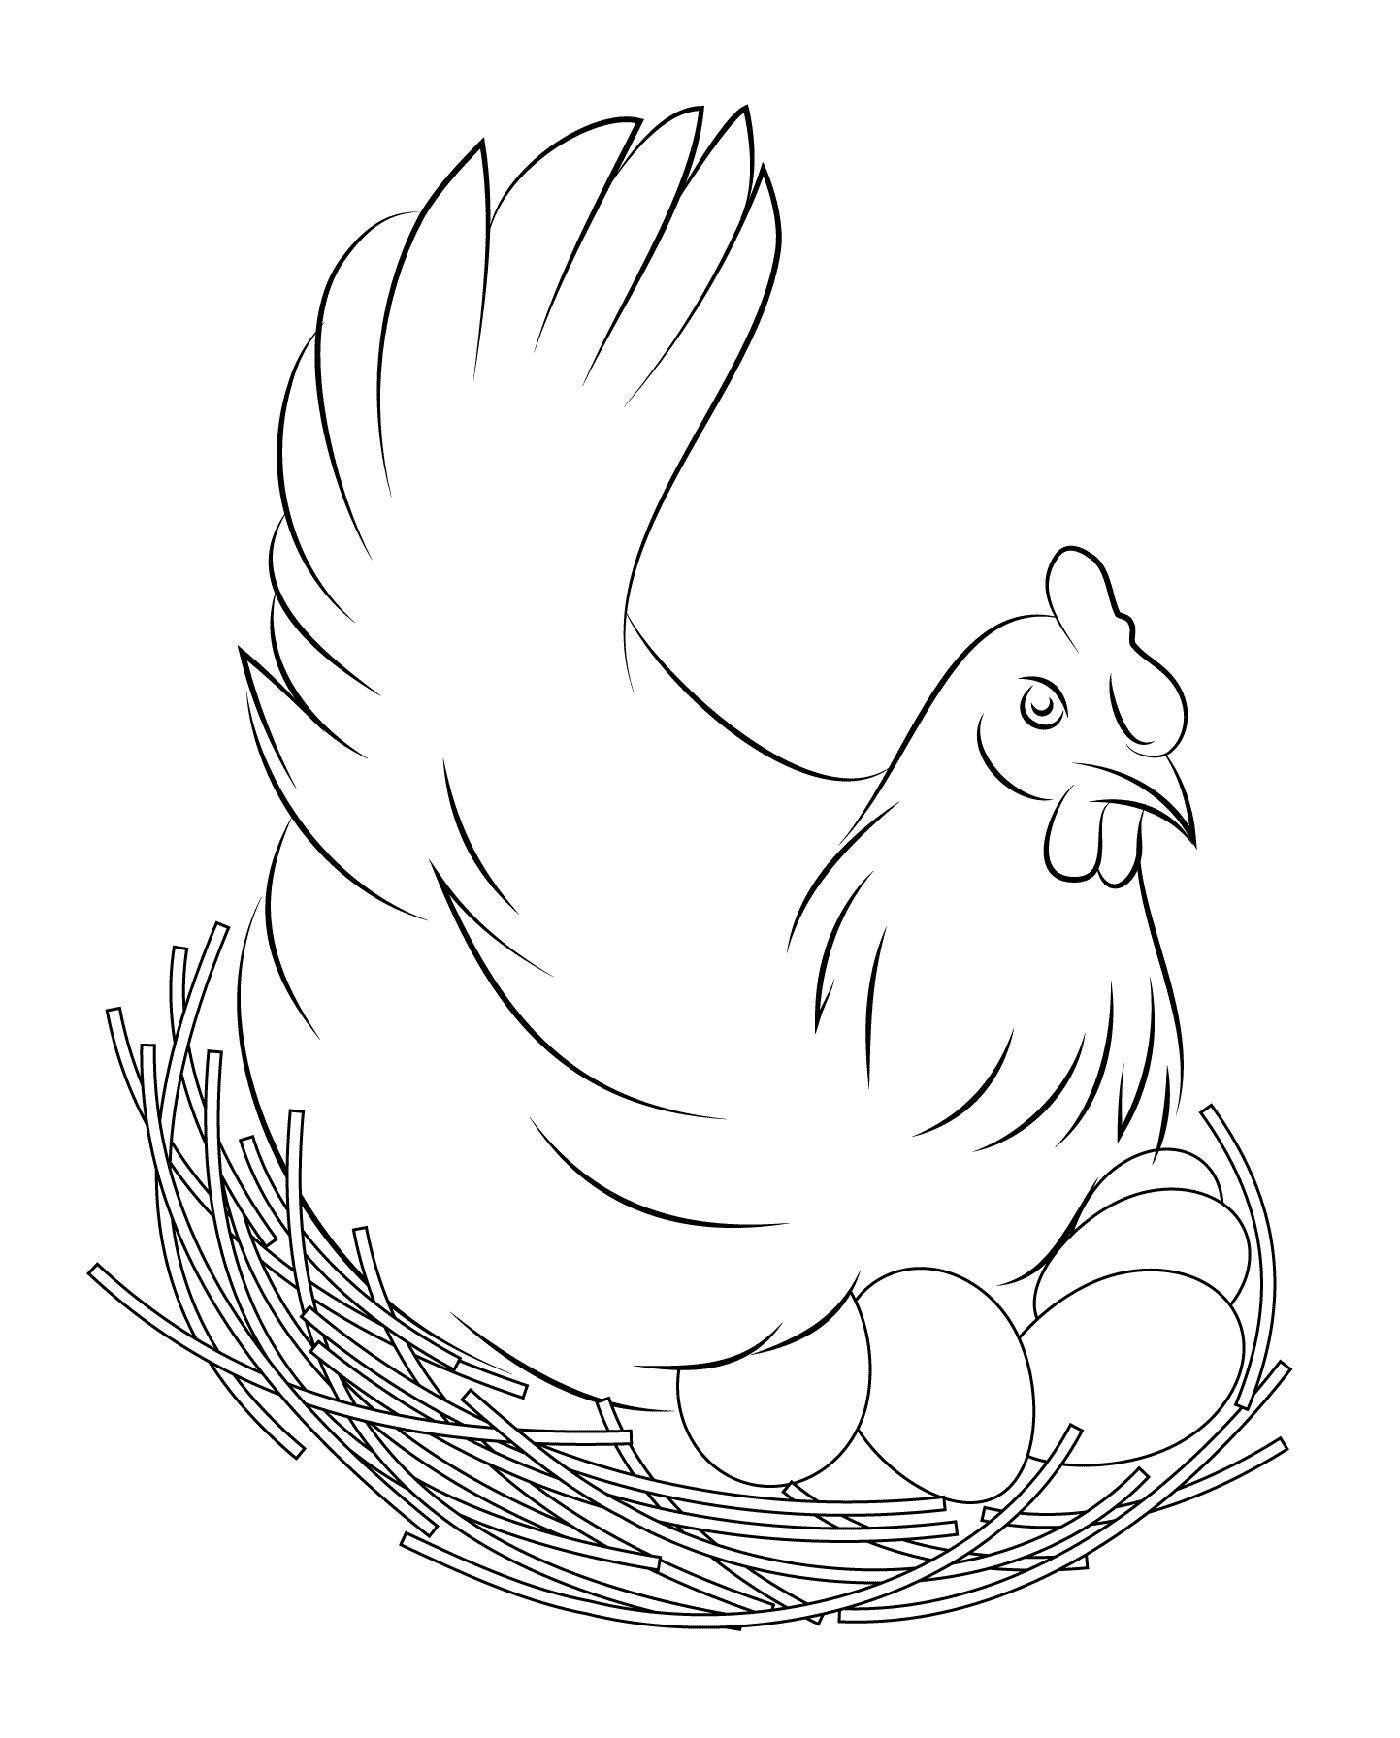 Chicken Coloring Pages to Print for Kids and Adults   101 Coloring